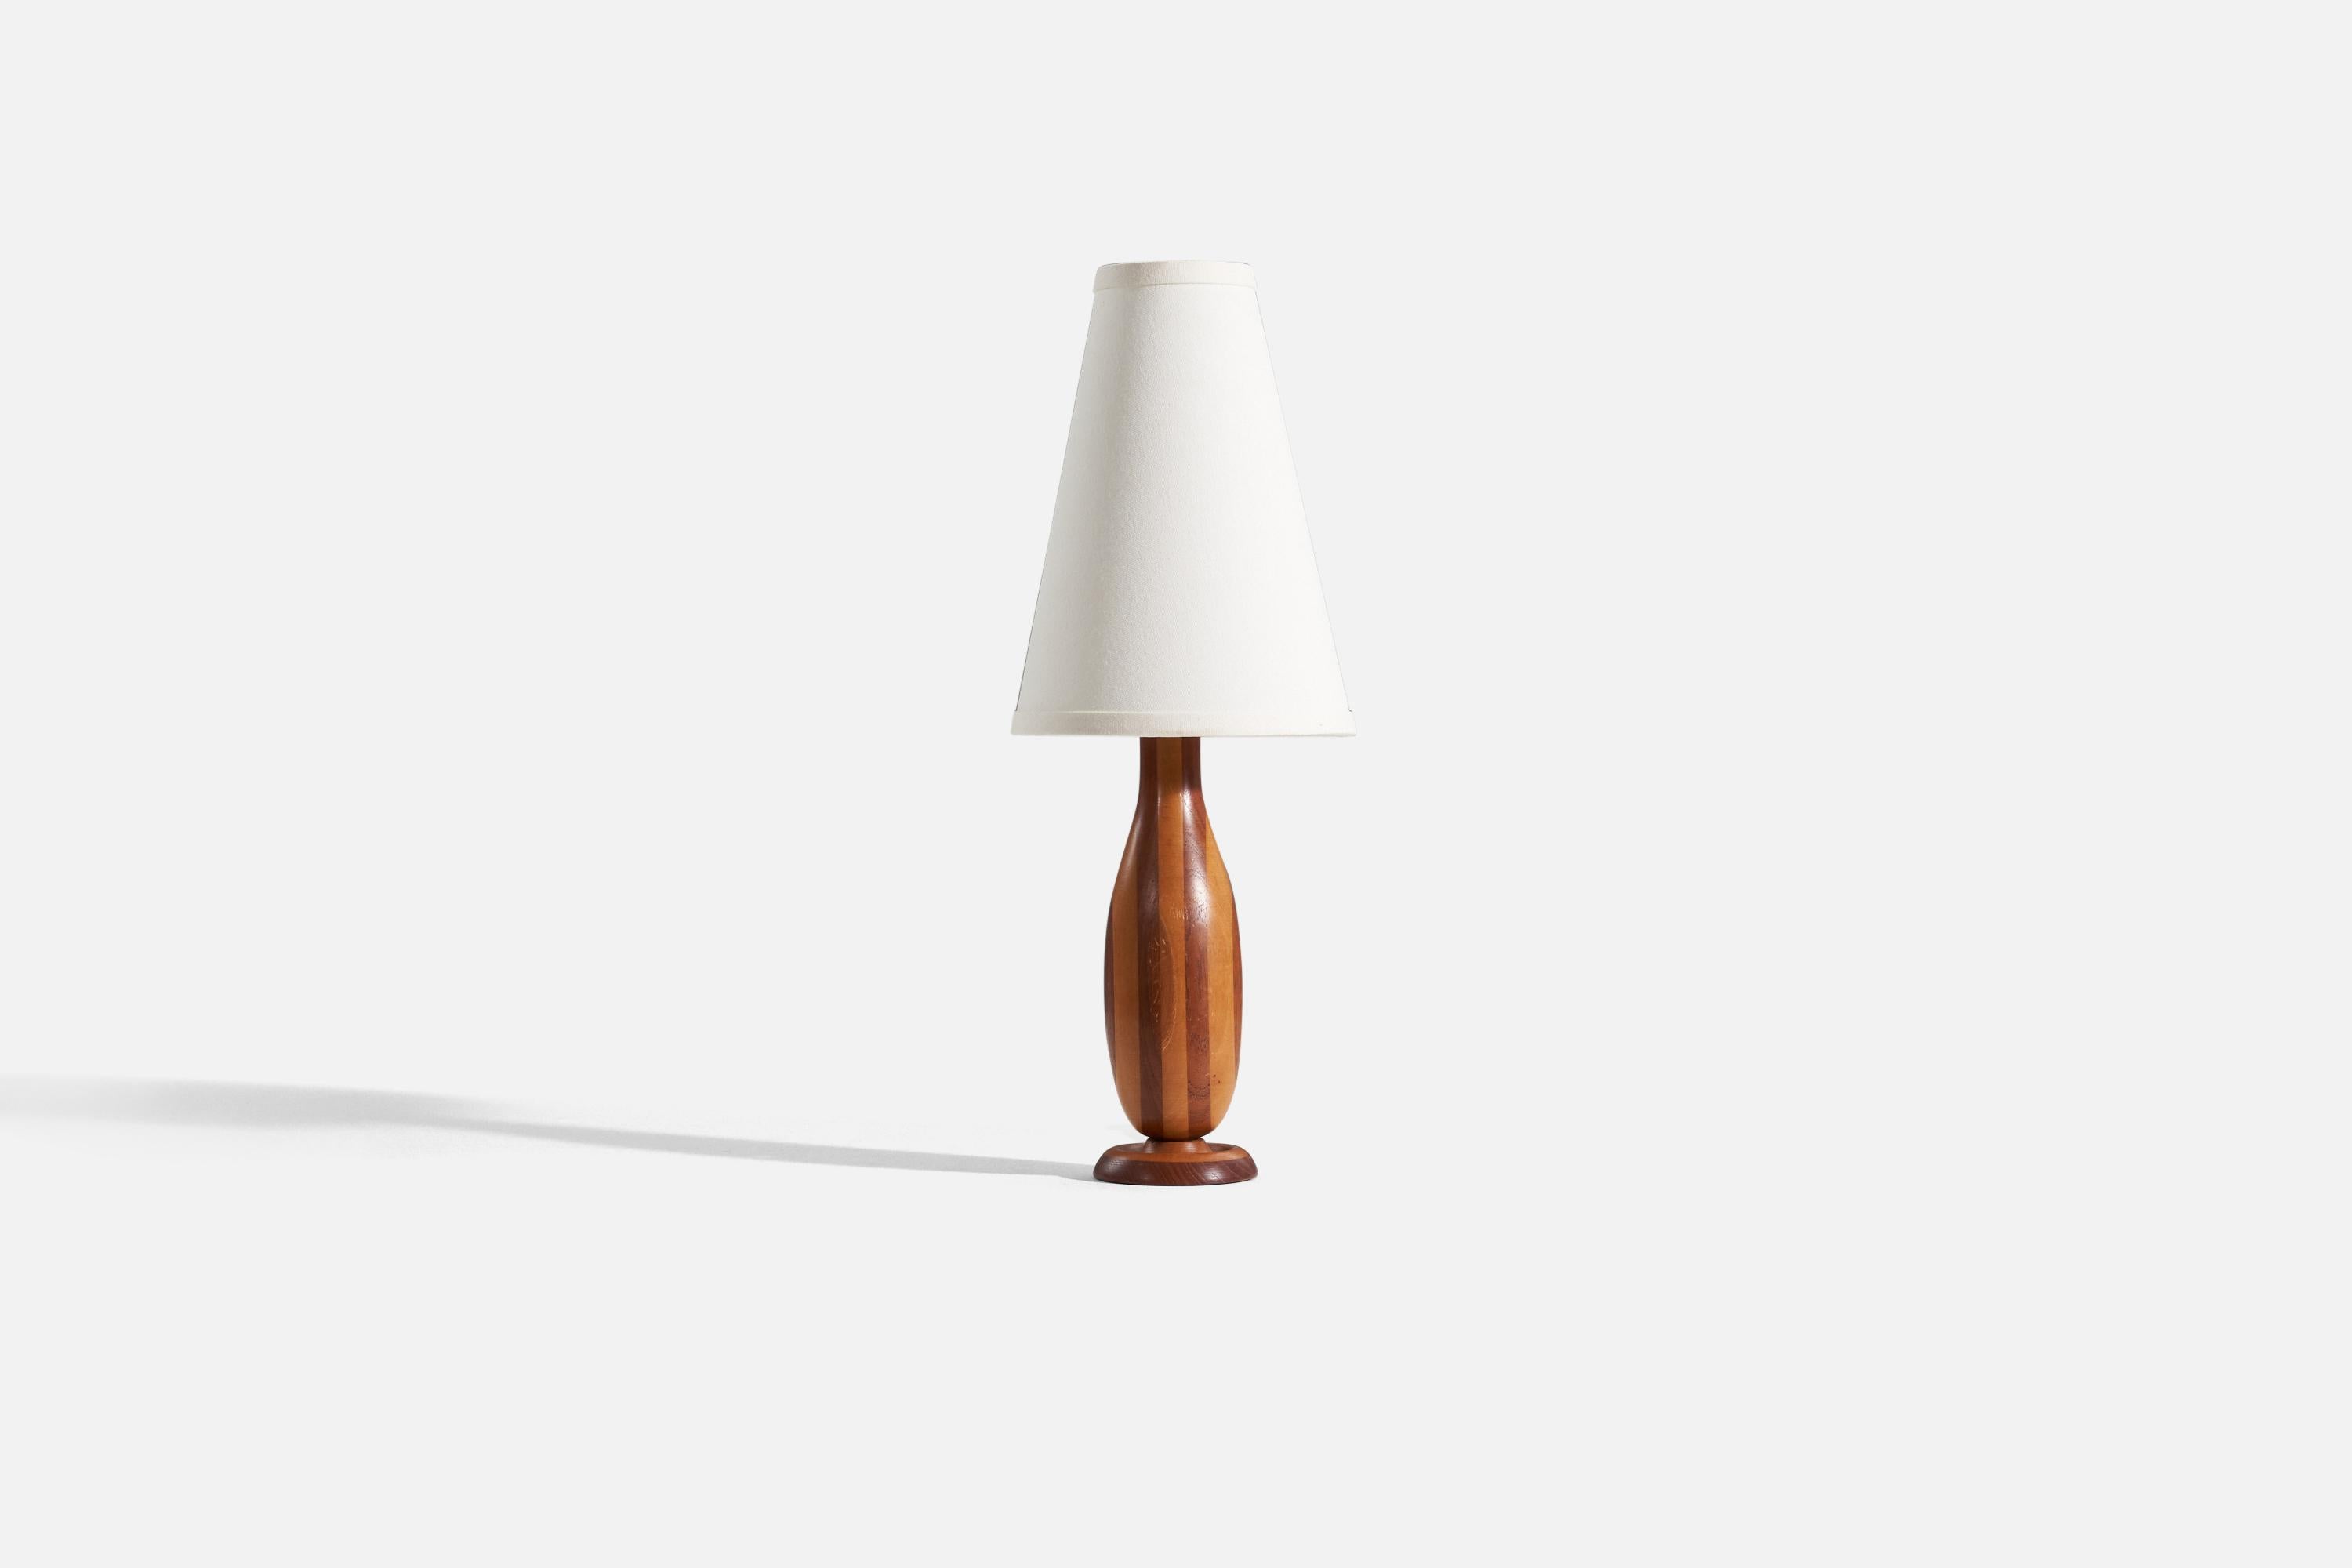 A wood table lamp, designed and produced by a Swedish designer, Sweden, 1960s.

Sold without lampshade. 
Dimensions of lamp (inches) : 13.5 x 3.5 x 3.5 (H x W x D).
Dimensions shade (inches) : 3.25 x 7.25 x 10 (T x B x H).
Dimension of lamp